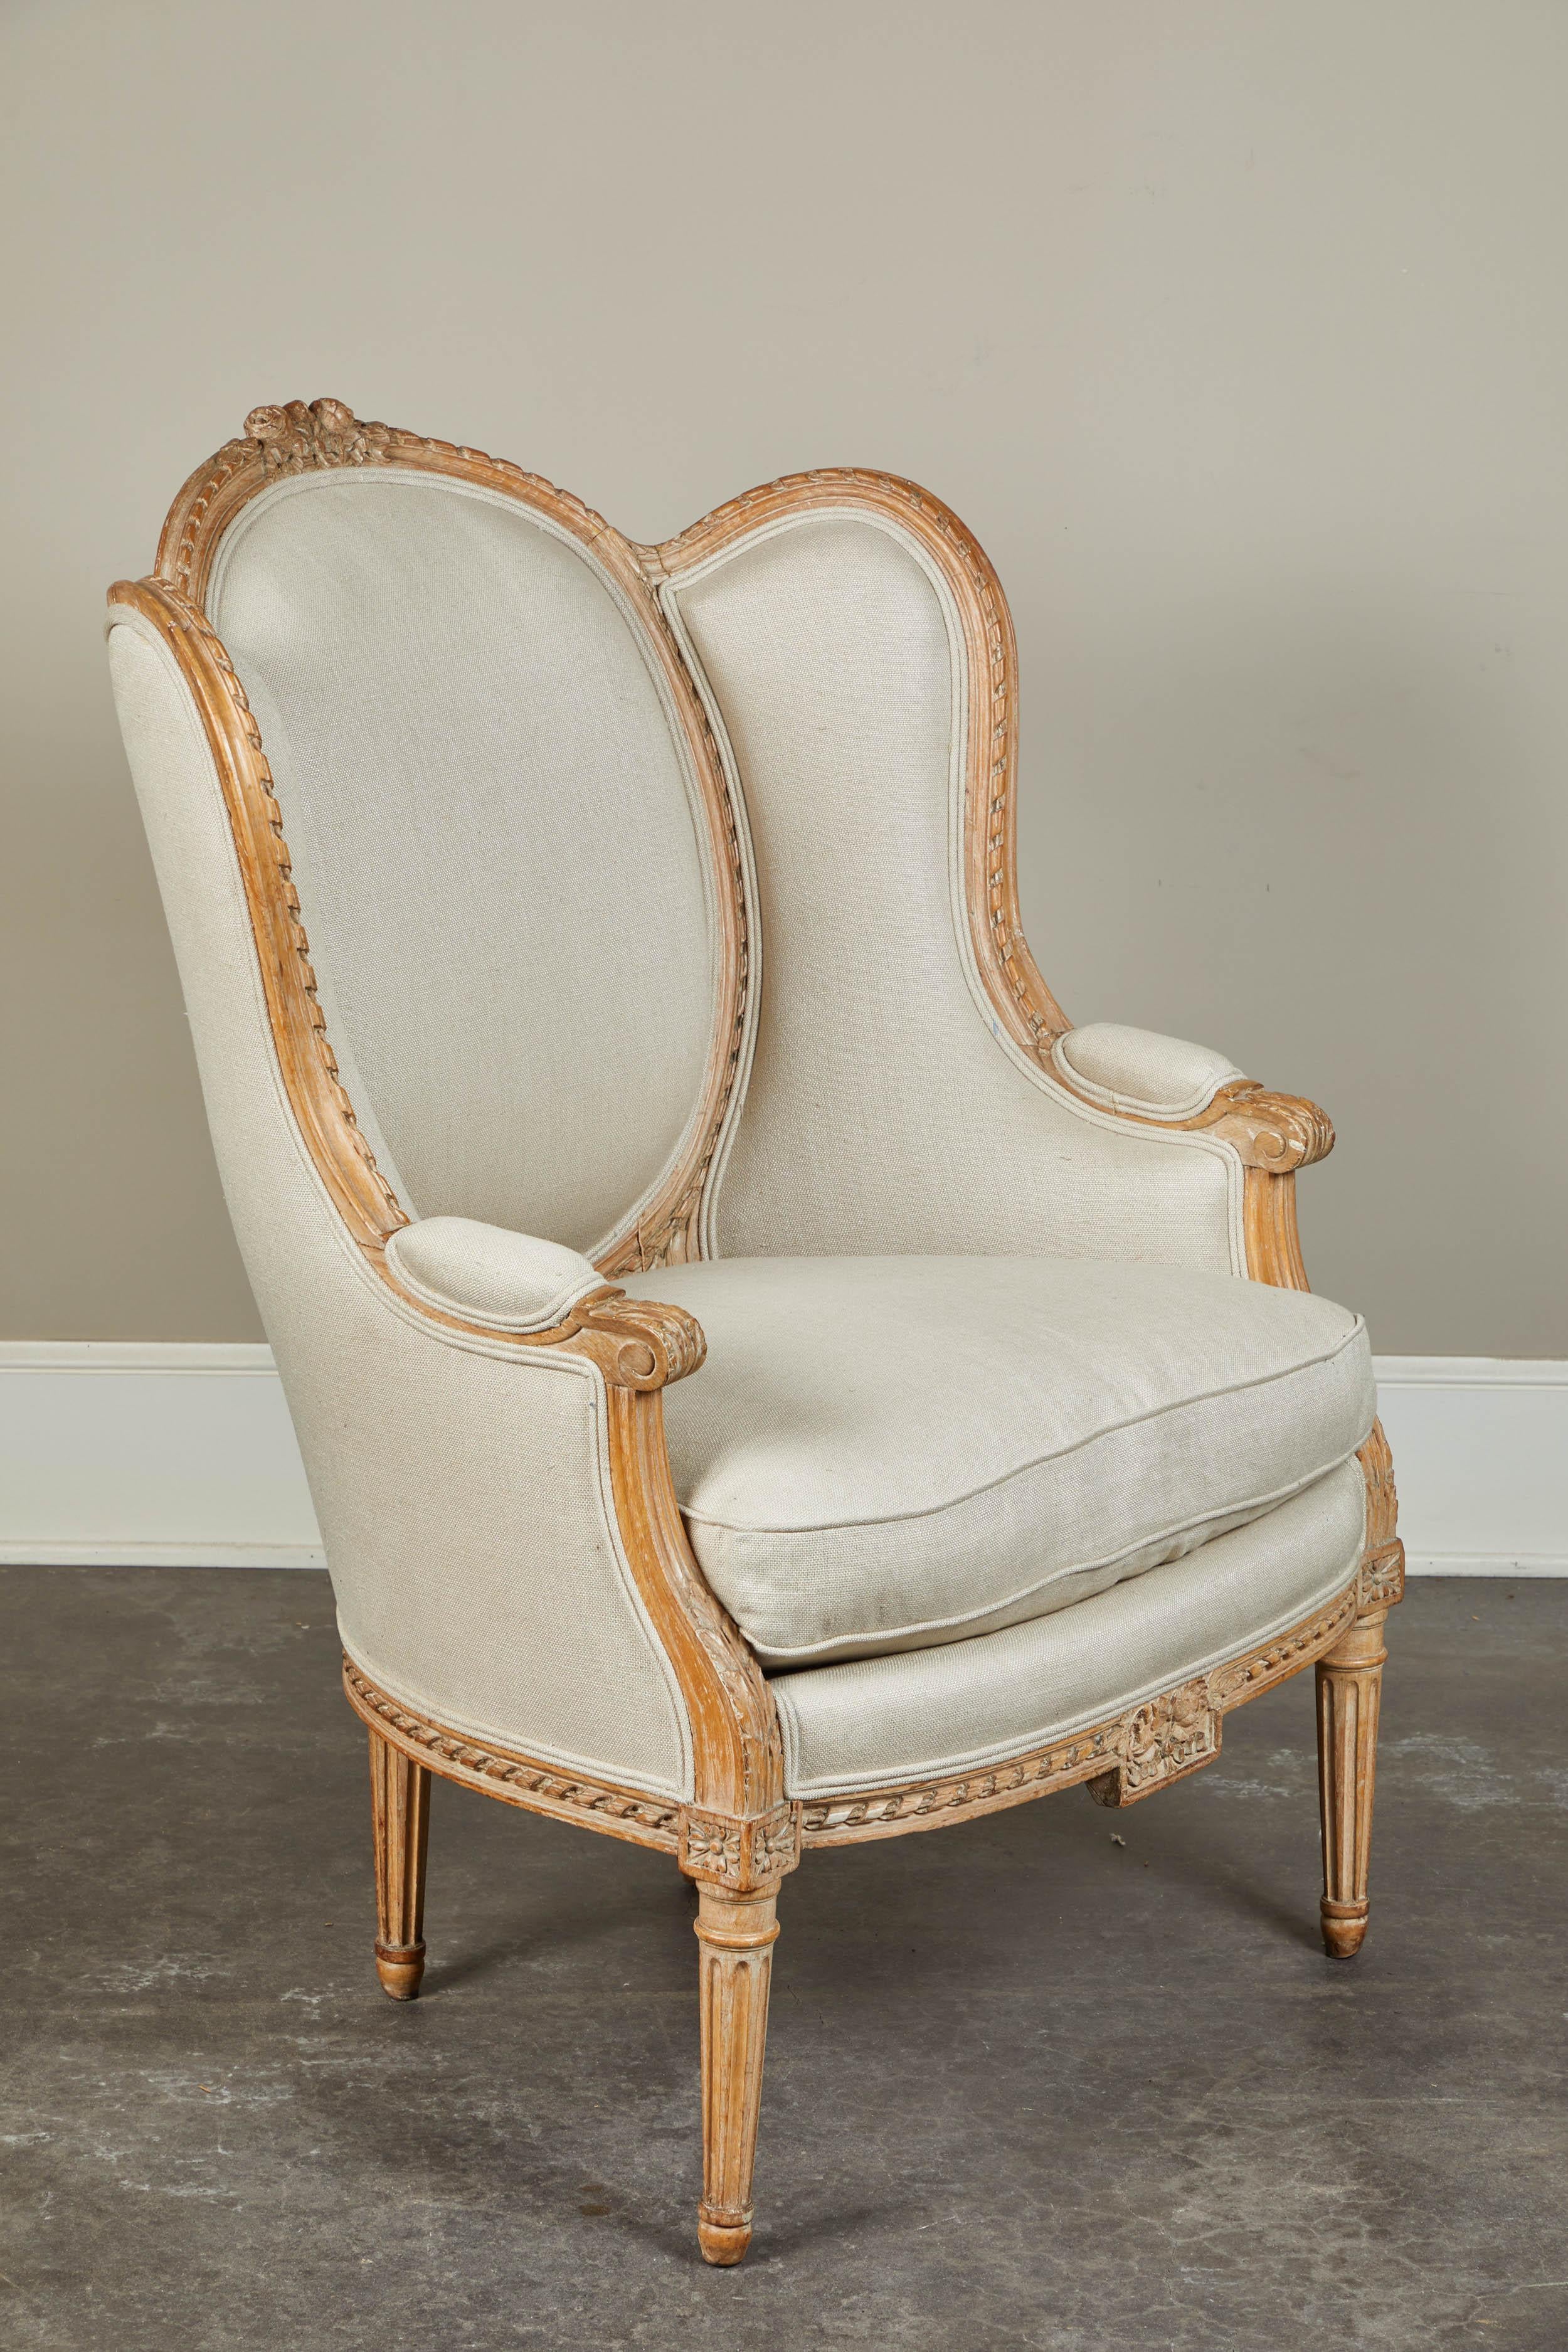 19th Century French Carved Chair with Beige Upholstery For Sale 2